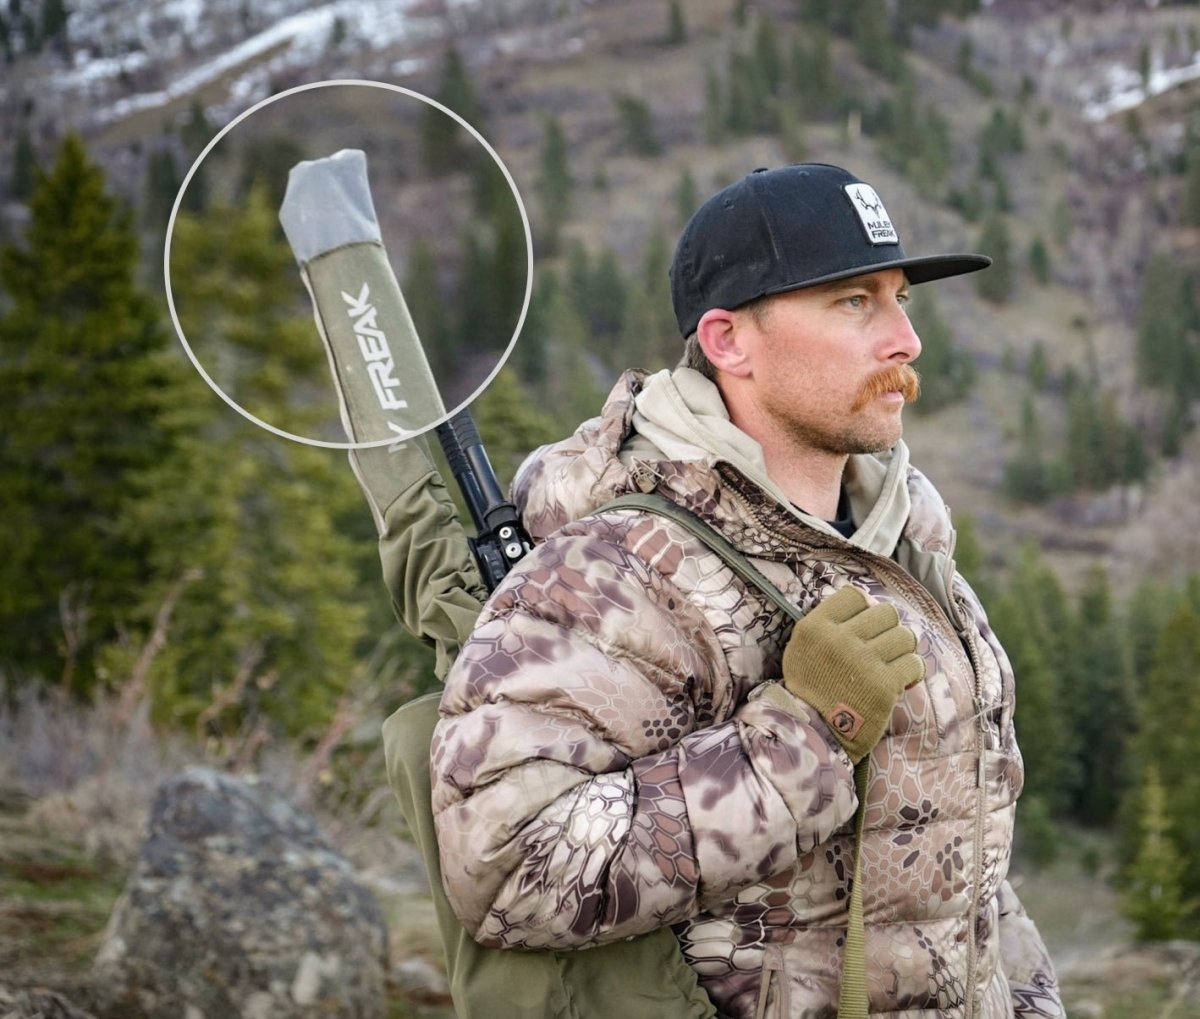 Pack-Konnect system in action, offering quick rifle access during hunts.